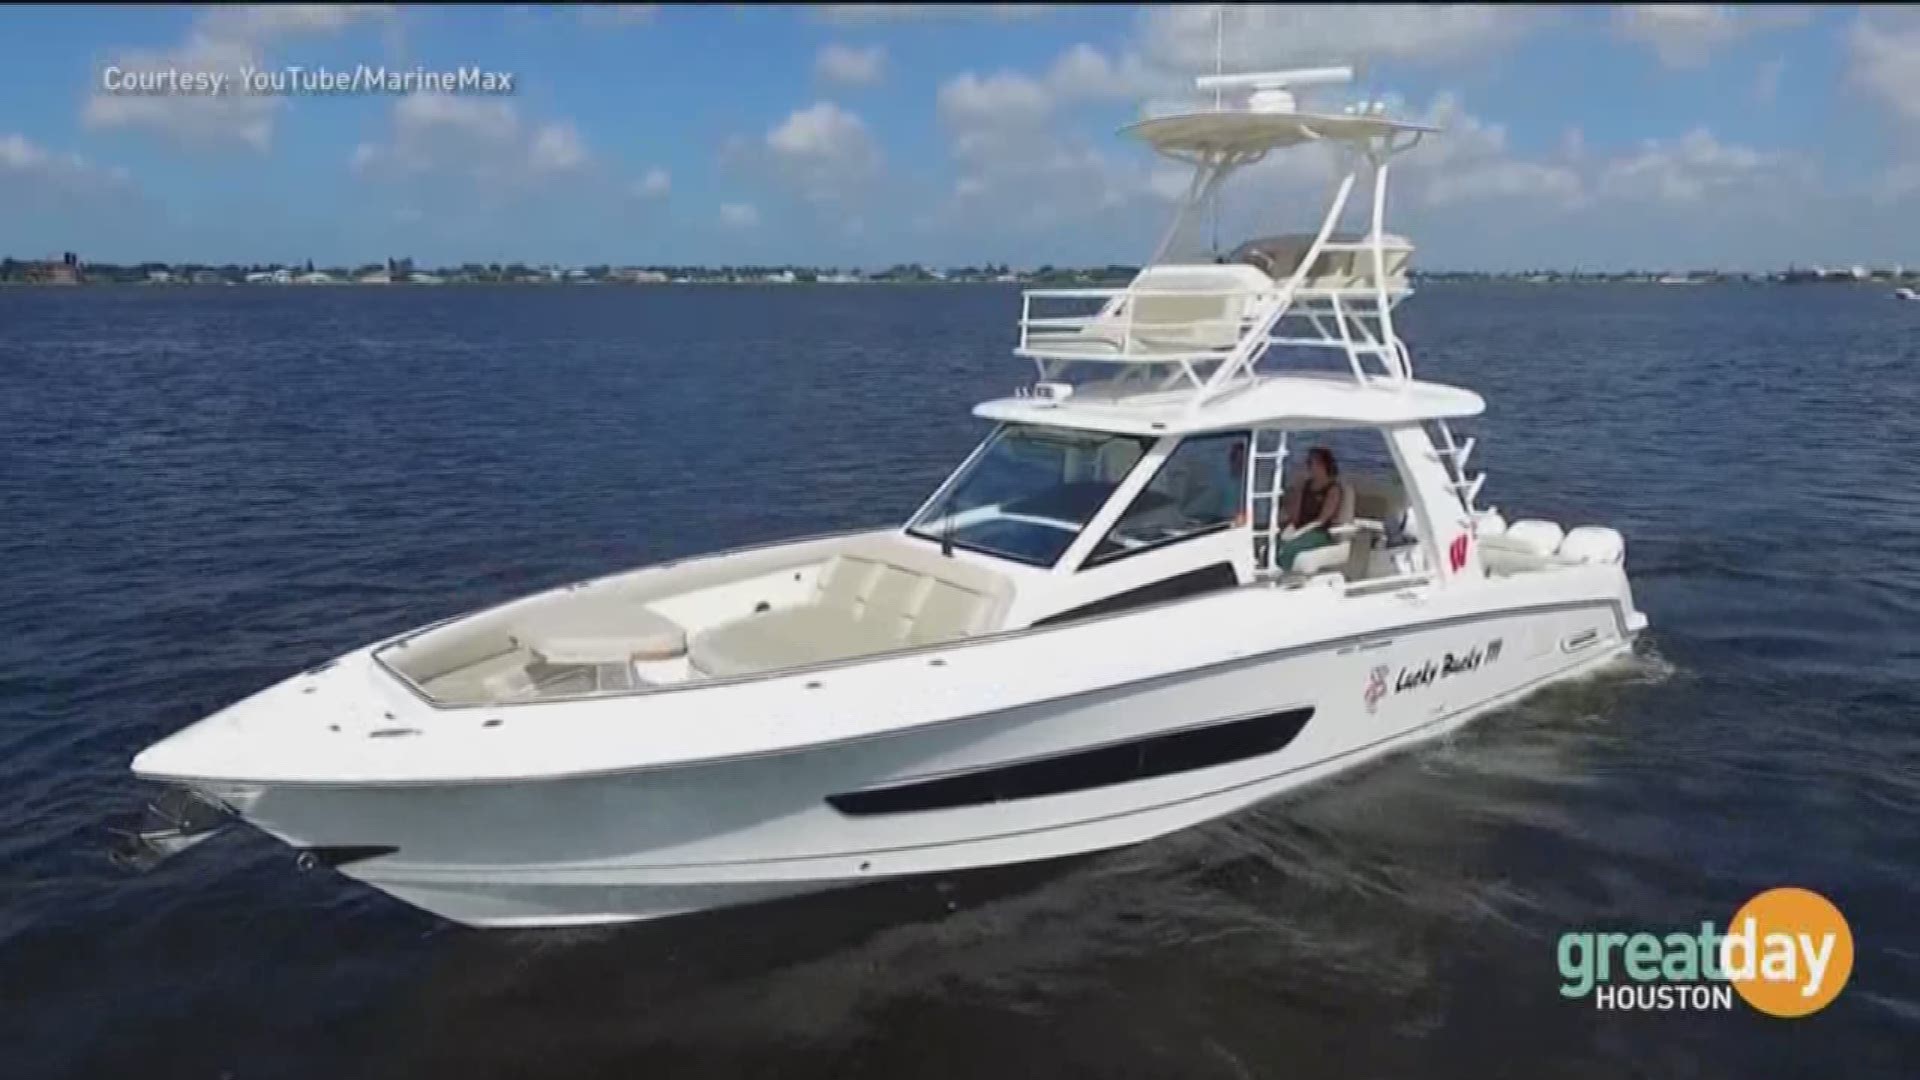 MarineMax Houston is just a quick 30 minute drive from the city, and they are inviting you to come party with them!  They host a series of getaways on their incredible boats!